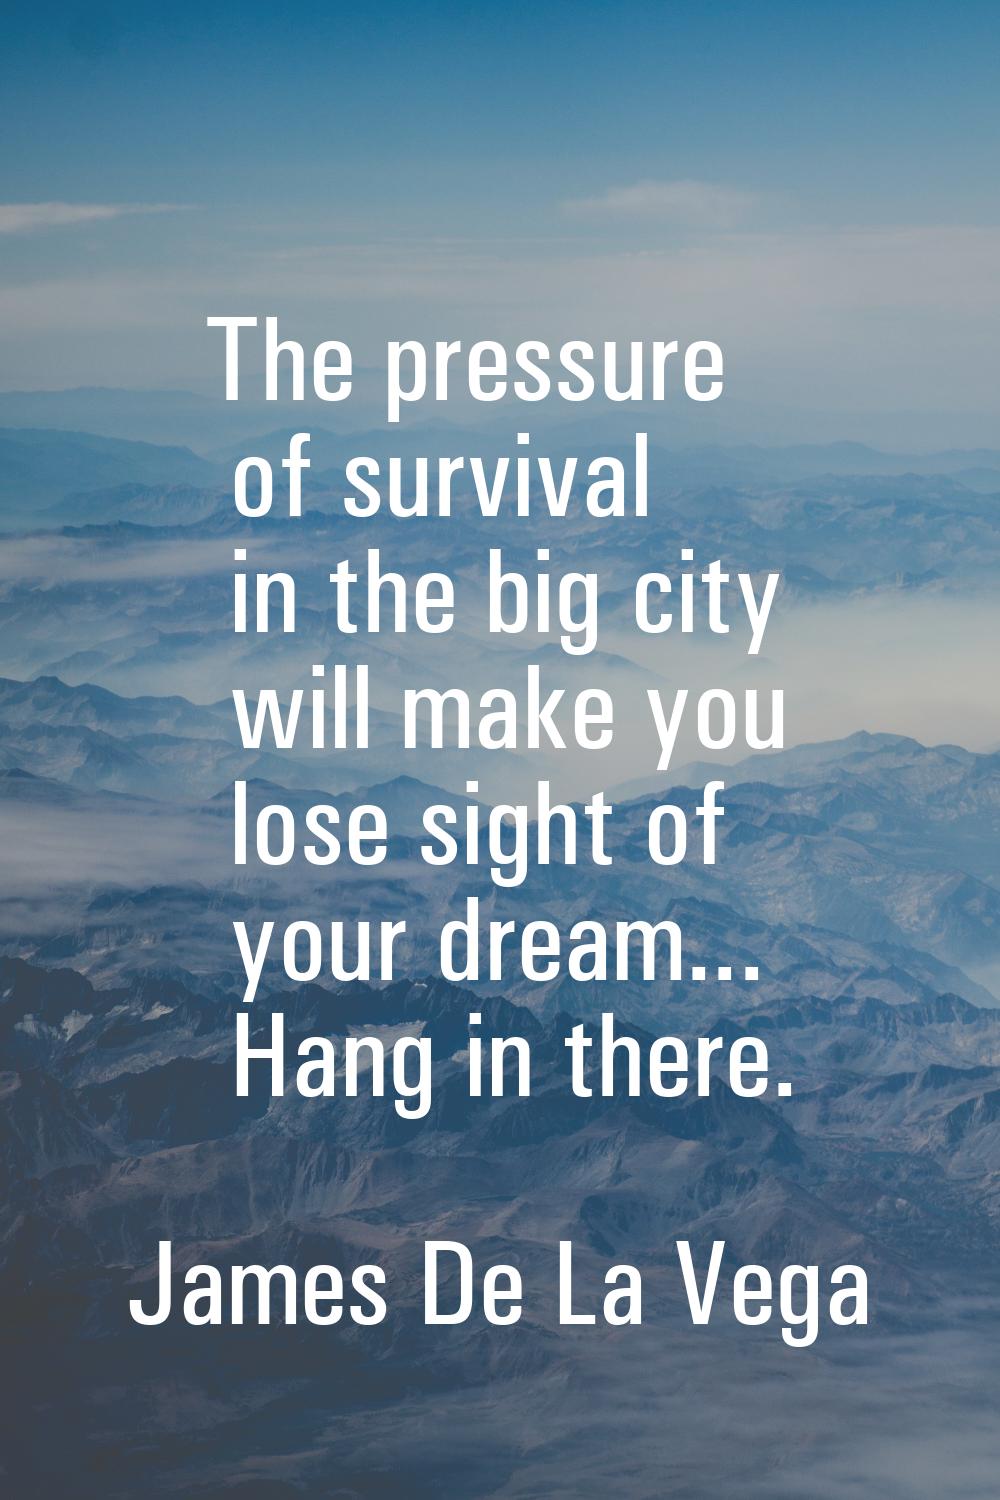 The pressure of survival in the big city will make you lose sight of your dream... Hang in there.